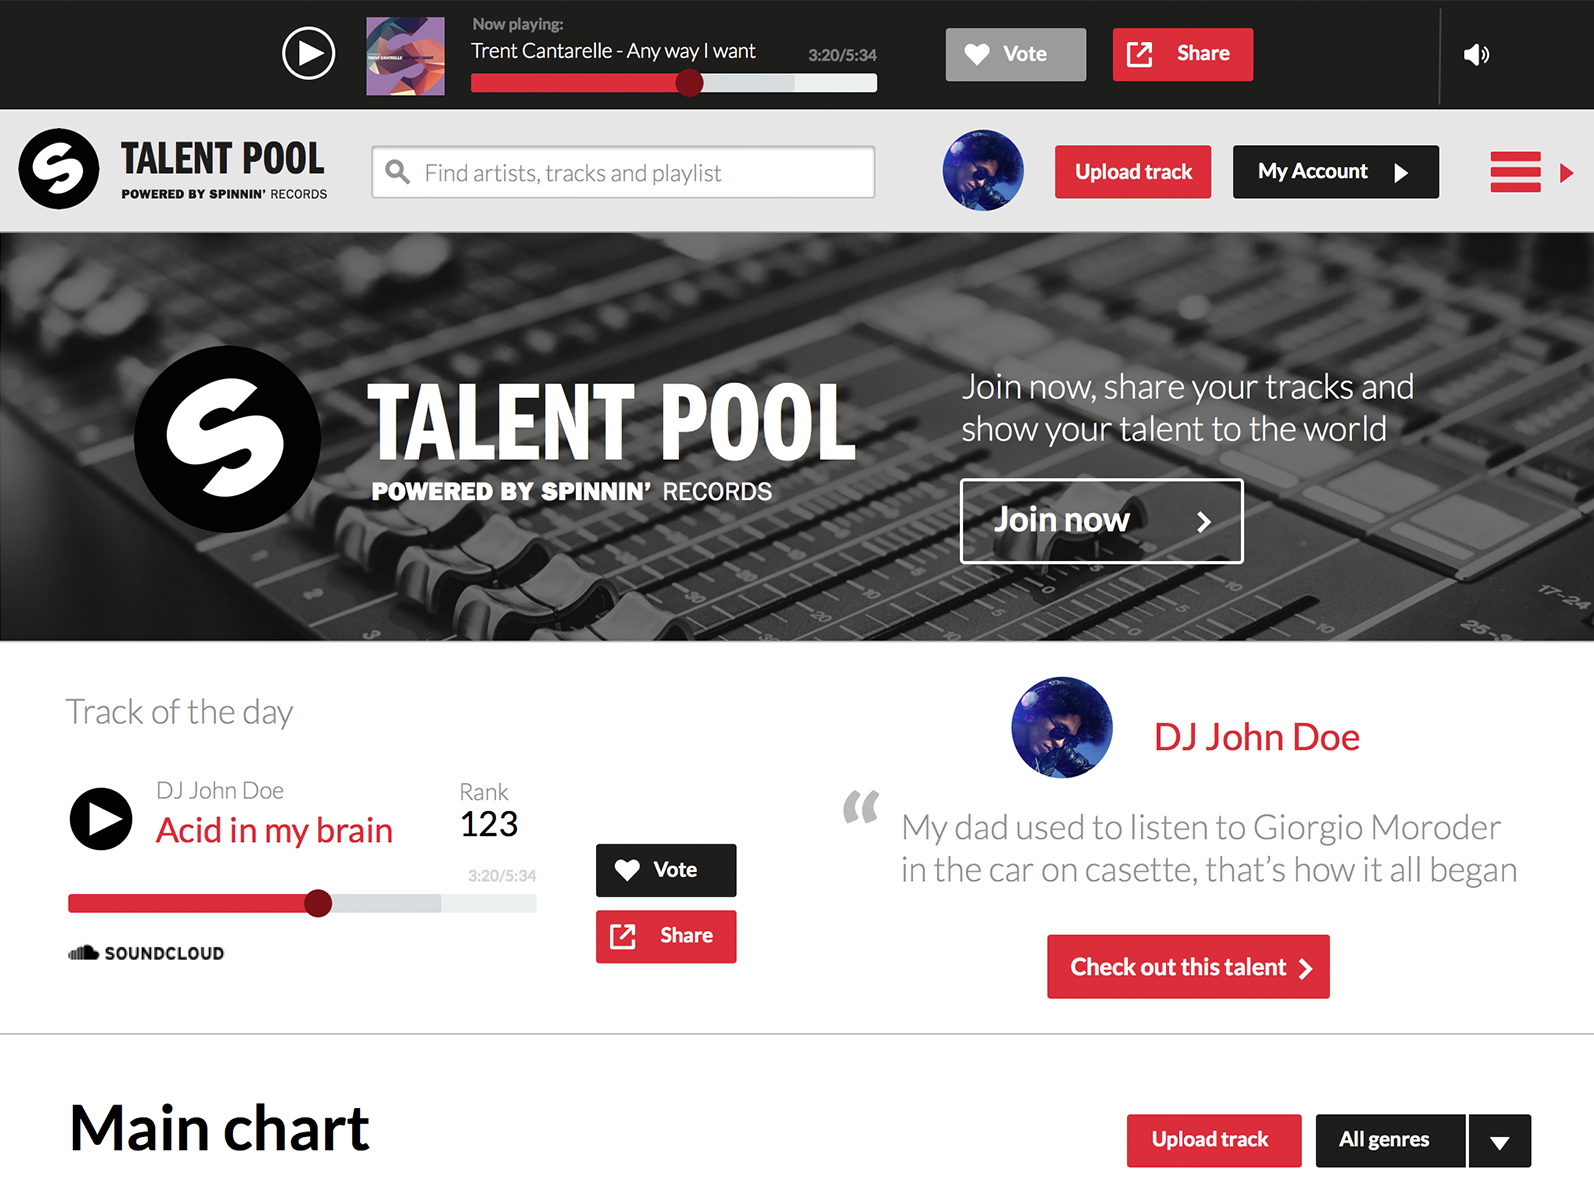 I will give you 120 Spinning records talent pool votes on your contest at only $5.